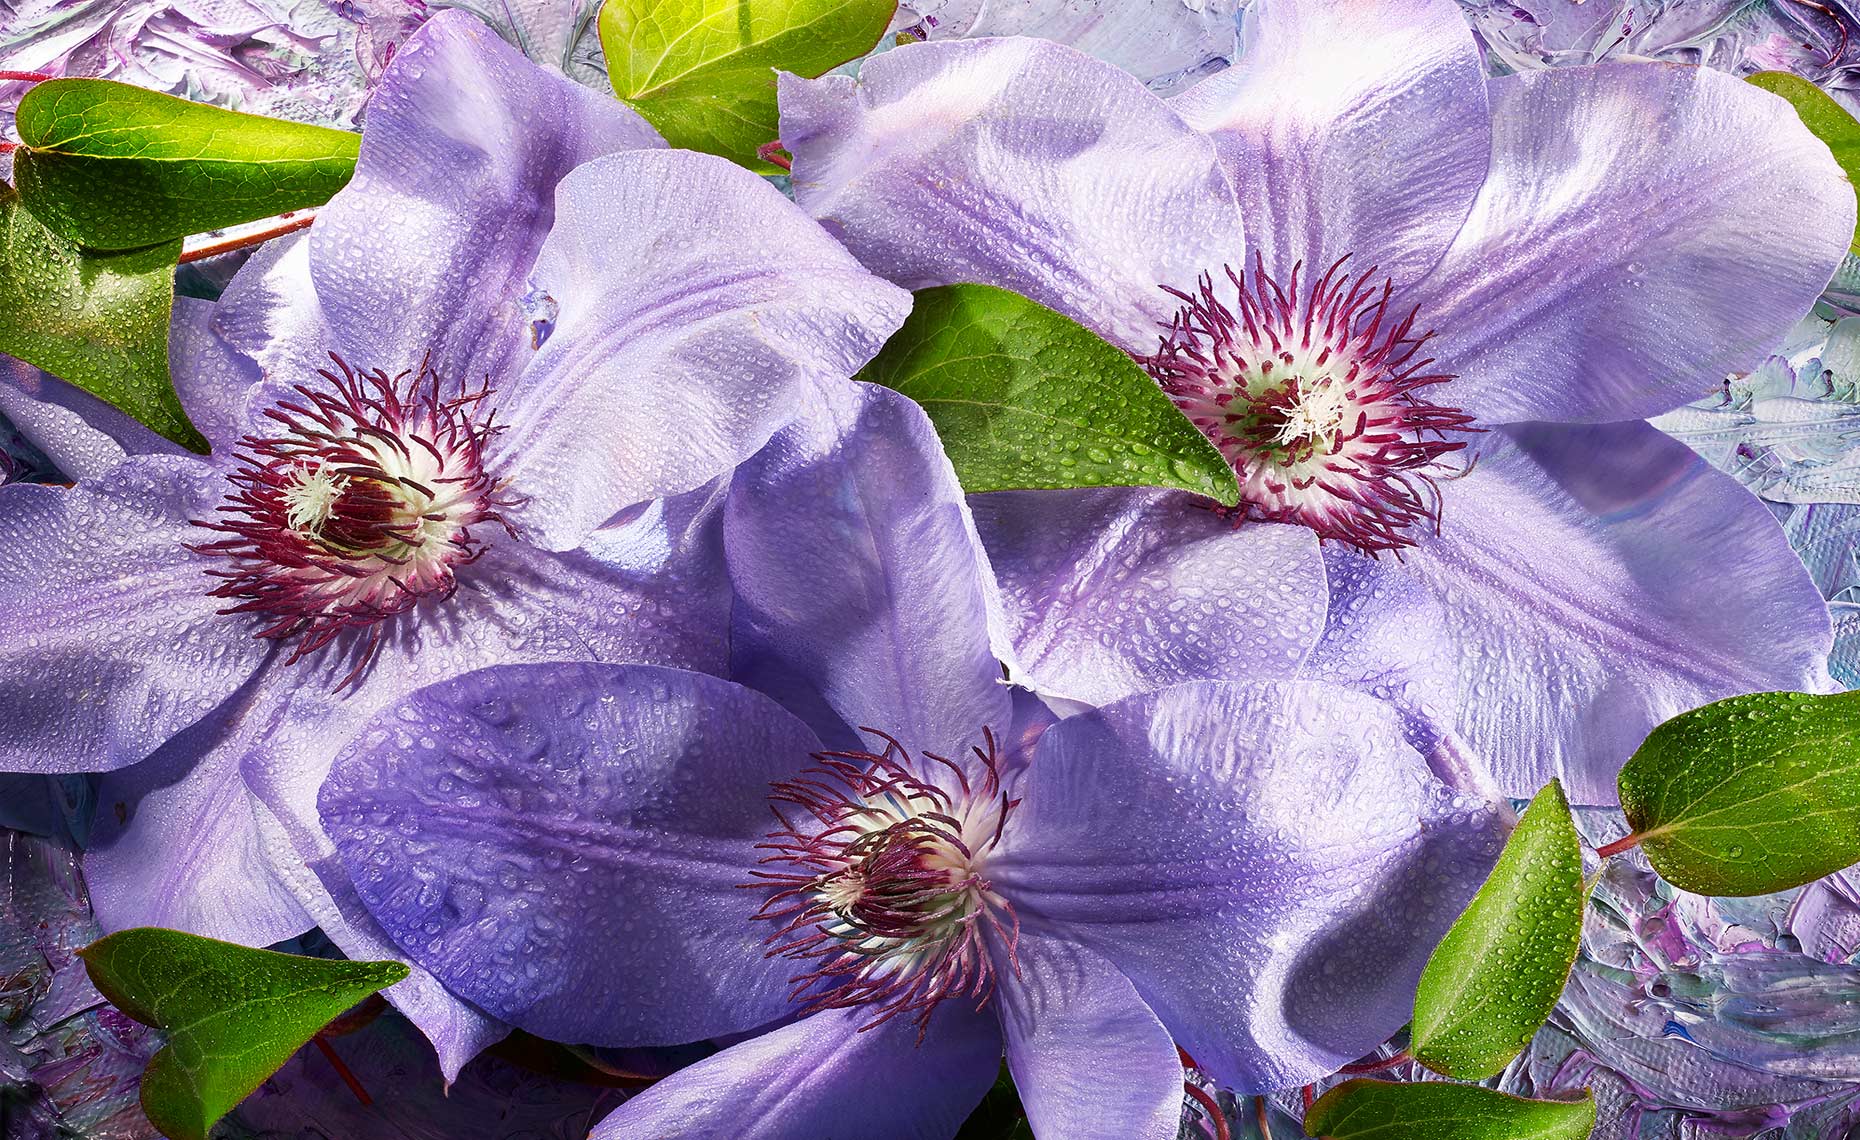  Purple Clematis flowers shot on a painted background